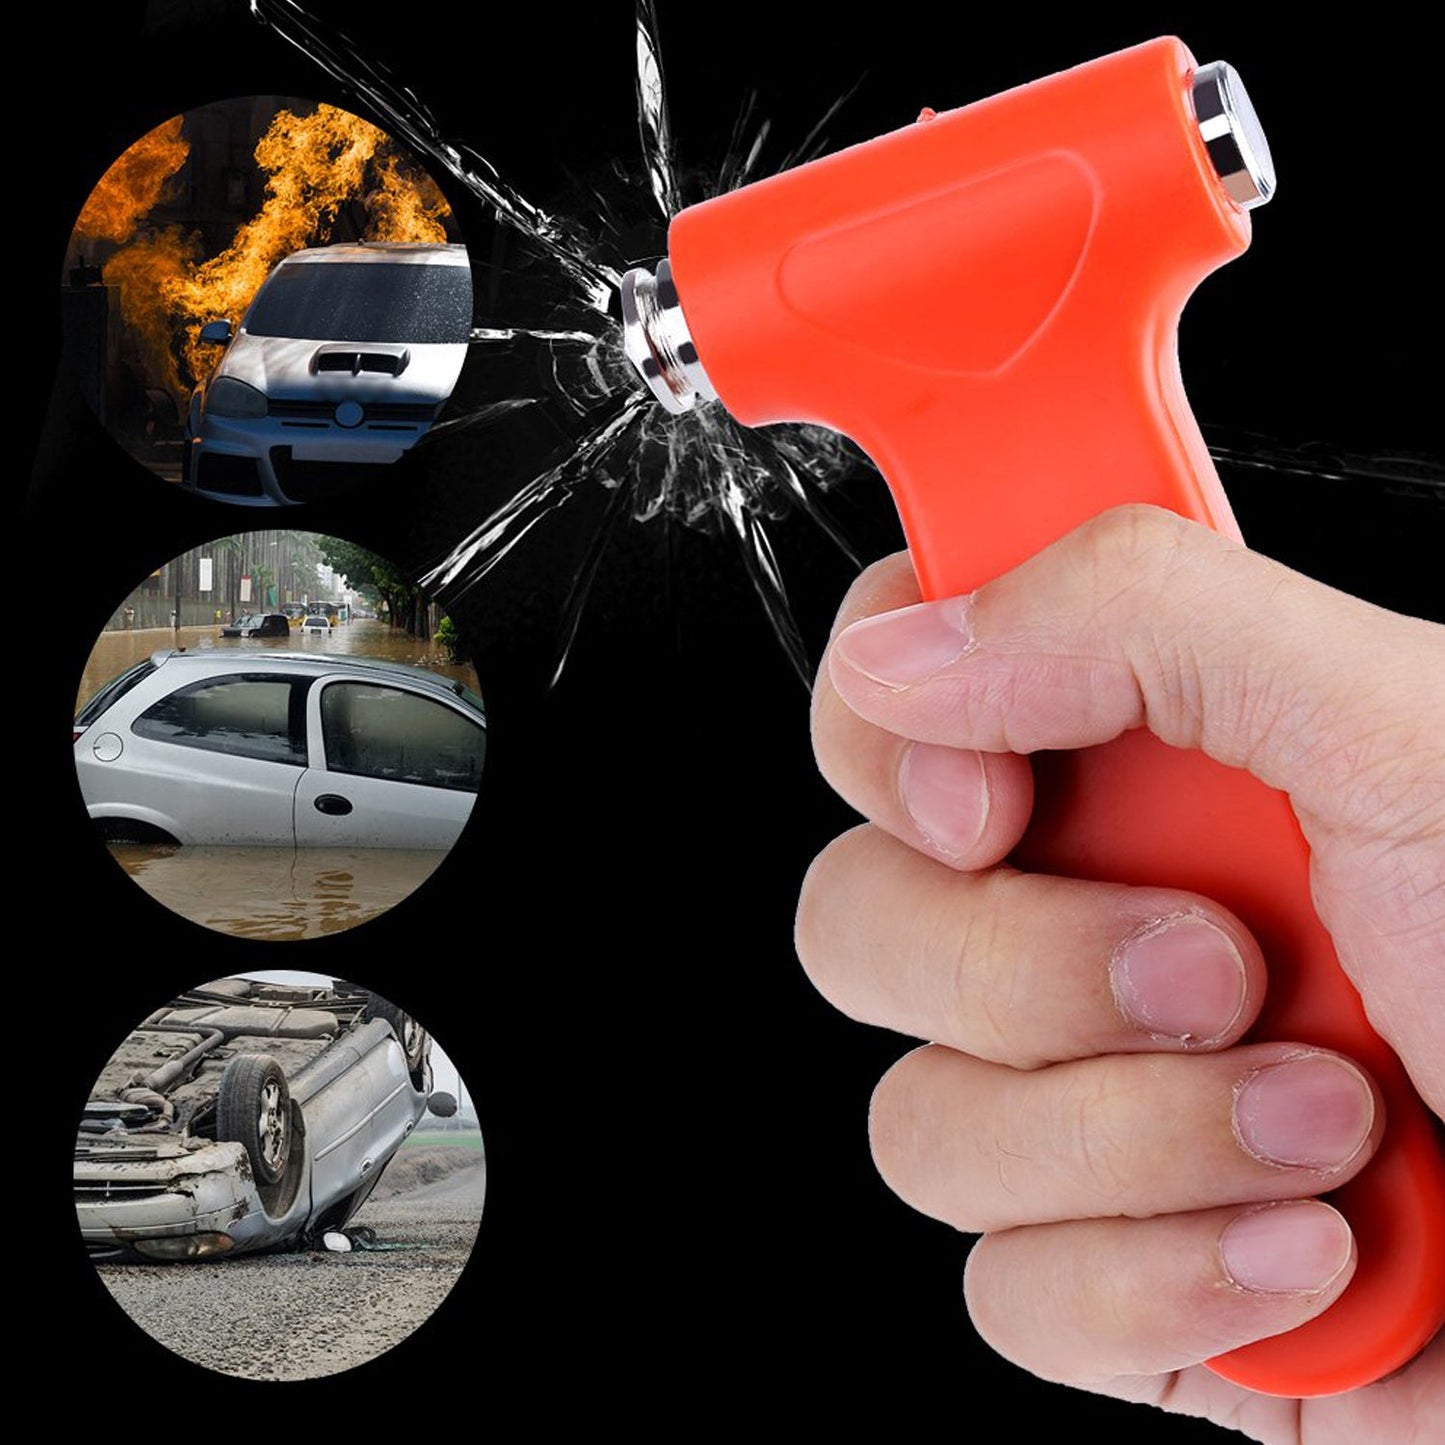 9393 Car Safety Hammer,Emergency and Rescue Tool,Car Window Breaker and Seatbelt Cutter,Safety Hammer Emergency Rescue Tool,Car Window Breaking Seat Belt Cutter (1 Pc)